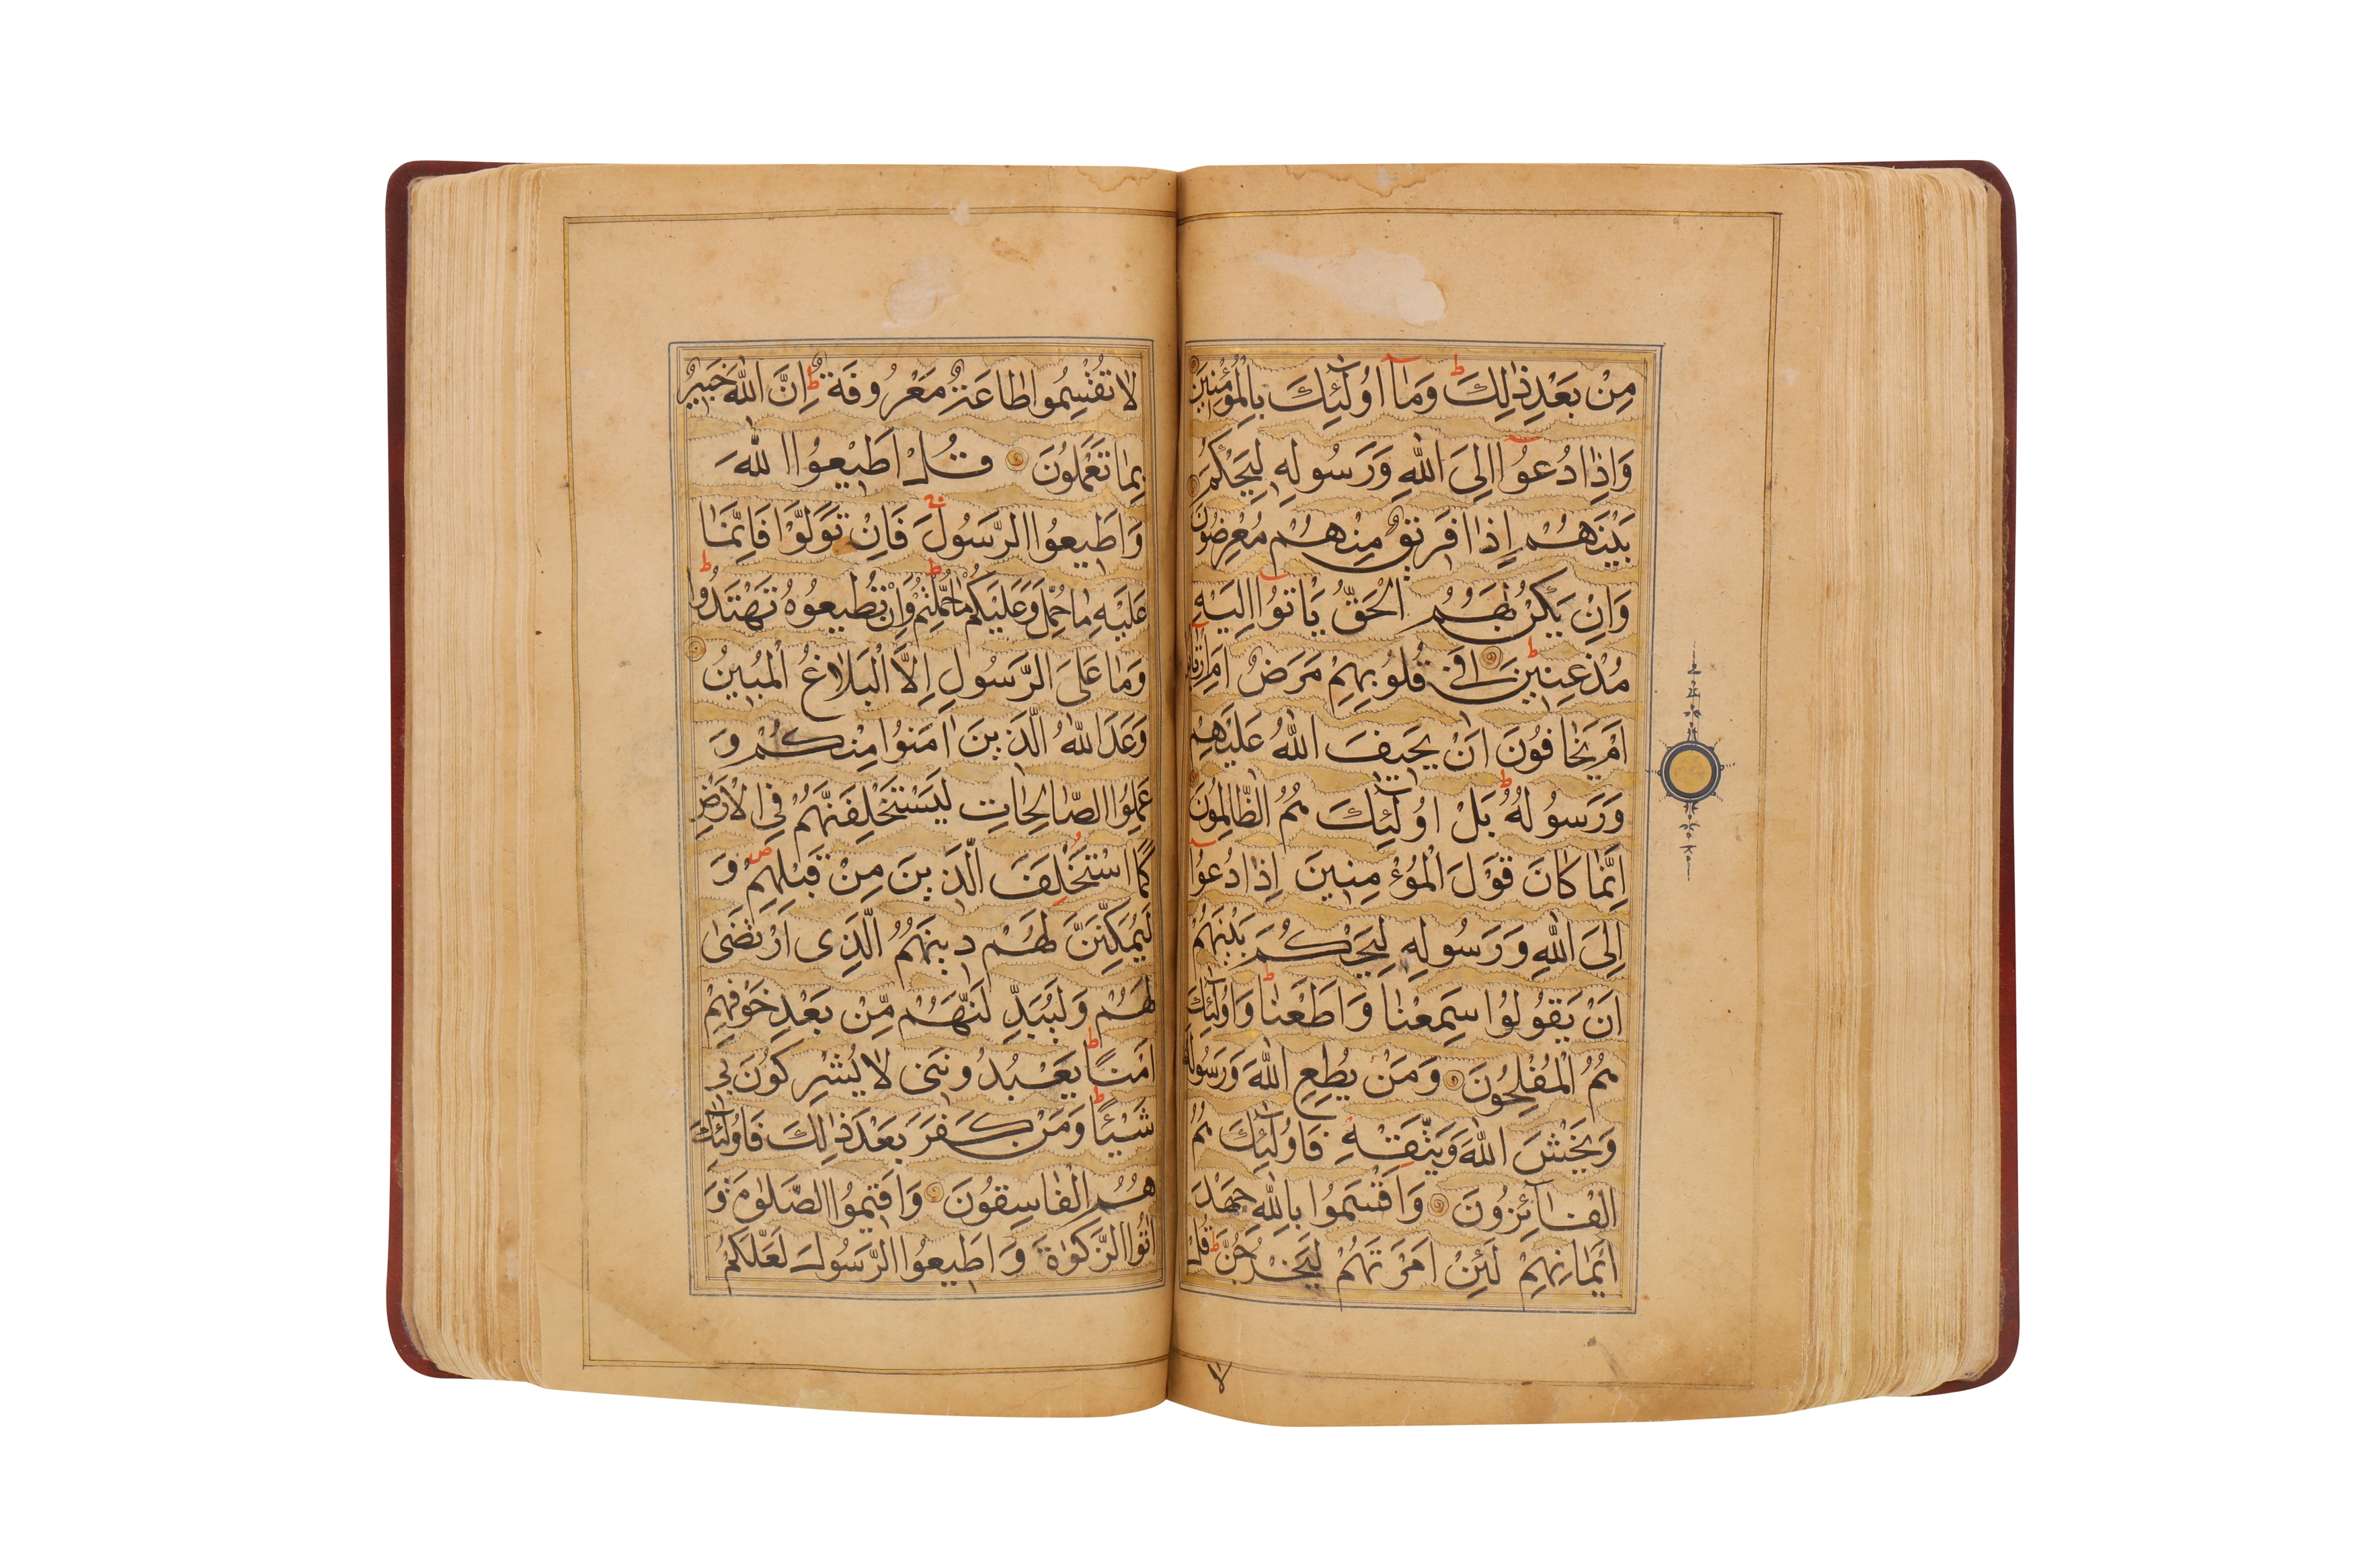 AN ILLUMINATED QUR'AN, INDIA, POSSIBLY 18TH CENTURY Kashmir, North India, probably late 18th centur - Image 6 of 8